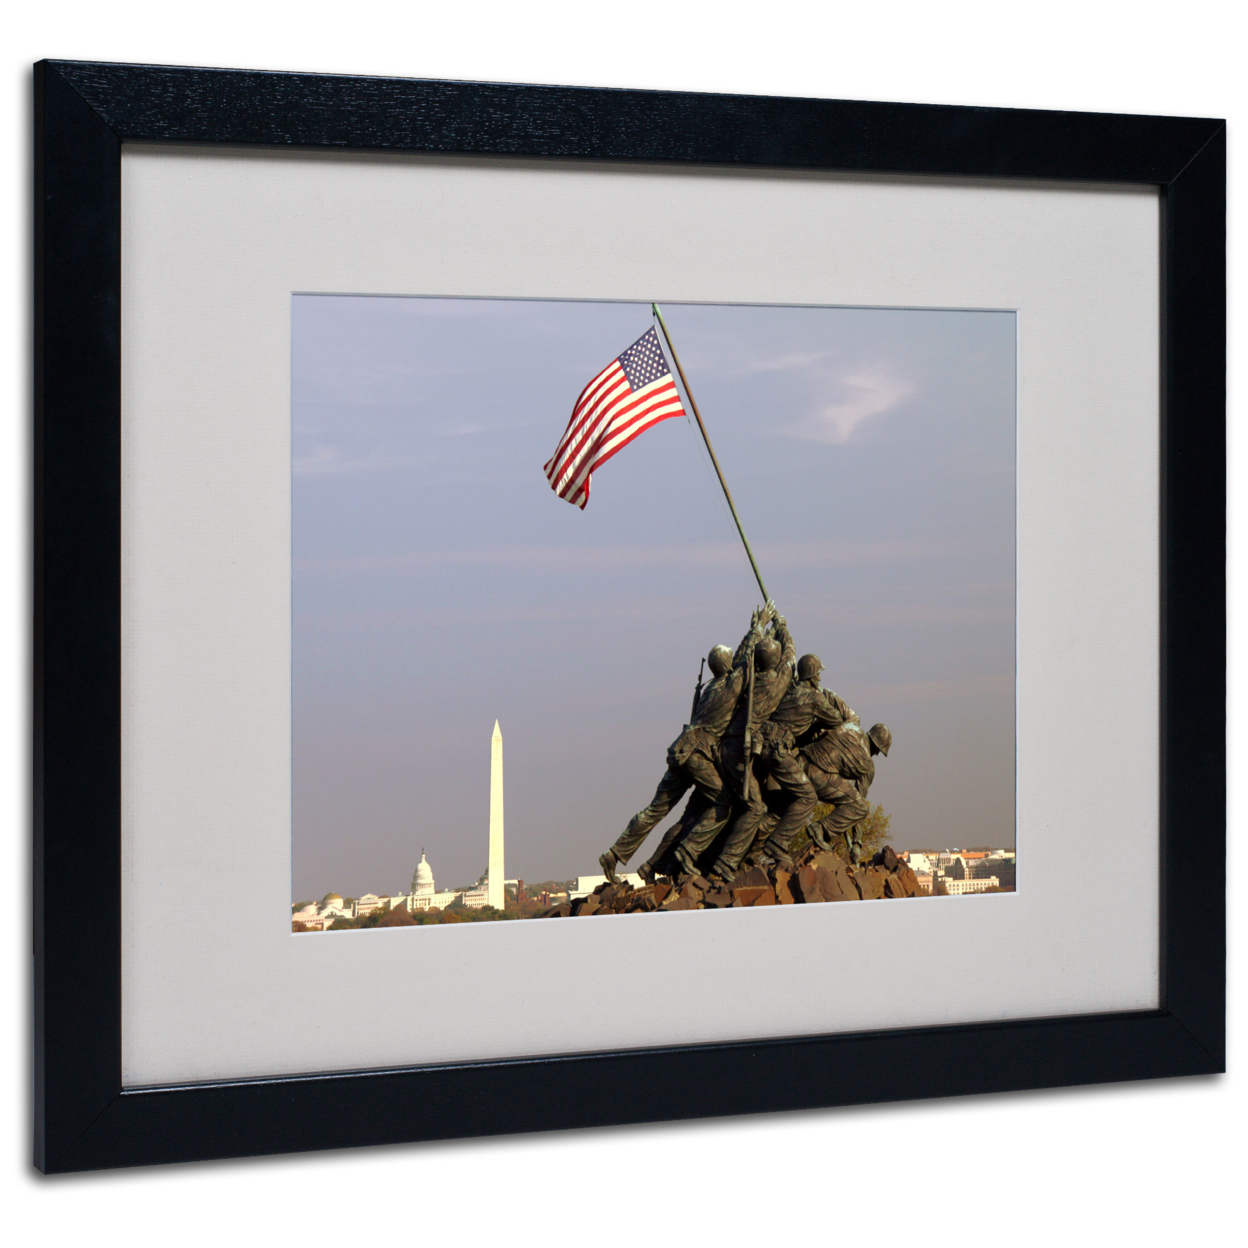 CATeyes 'Marine Corps Memorial' Black Wooden Framed Art 18 X 22 Inches